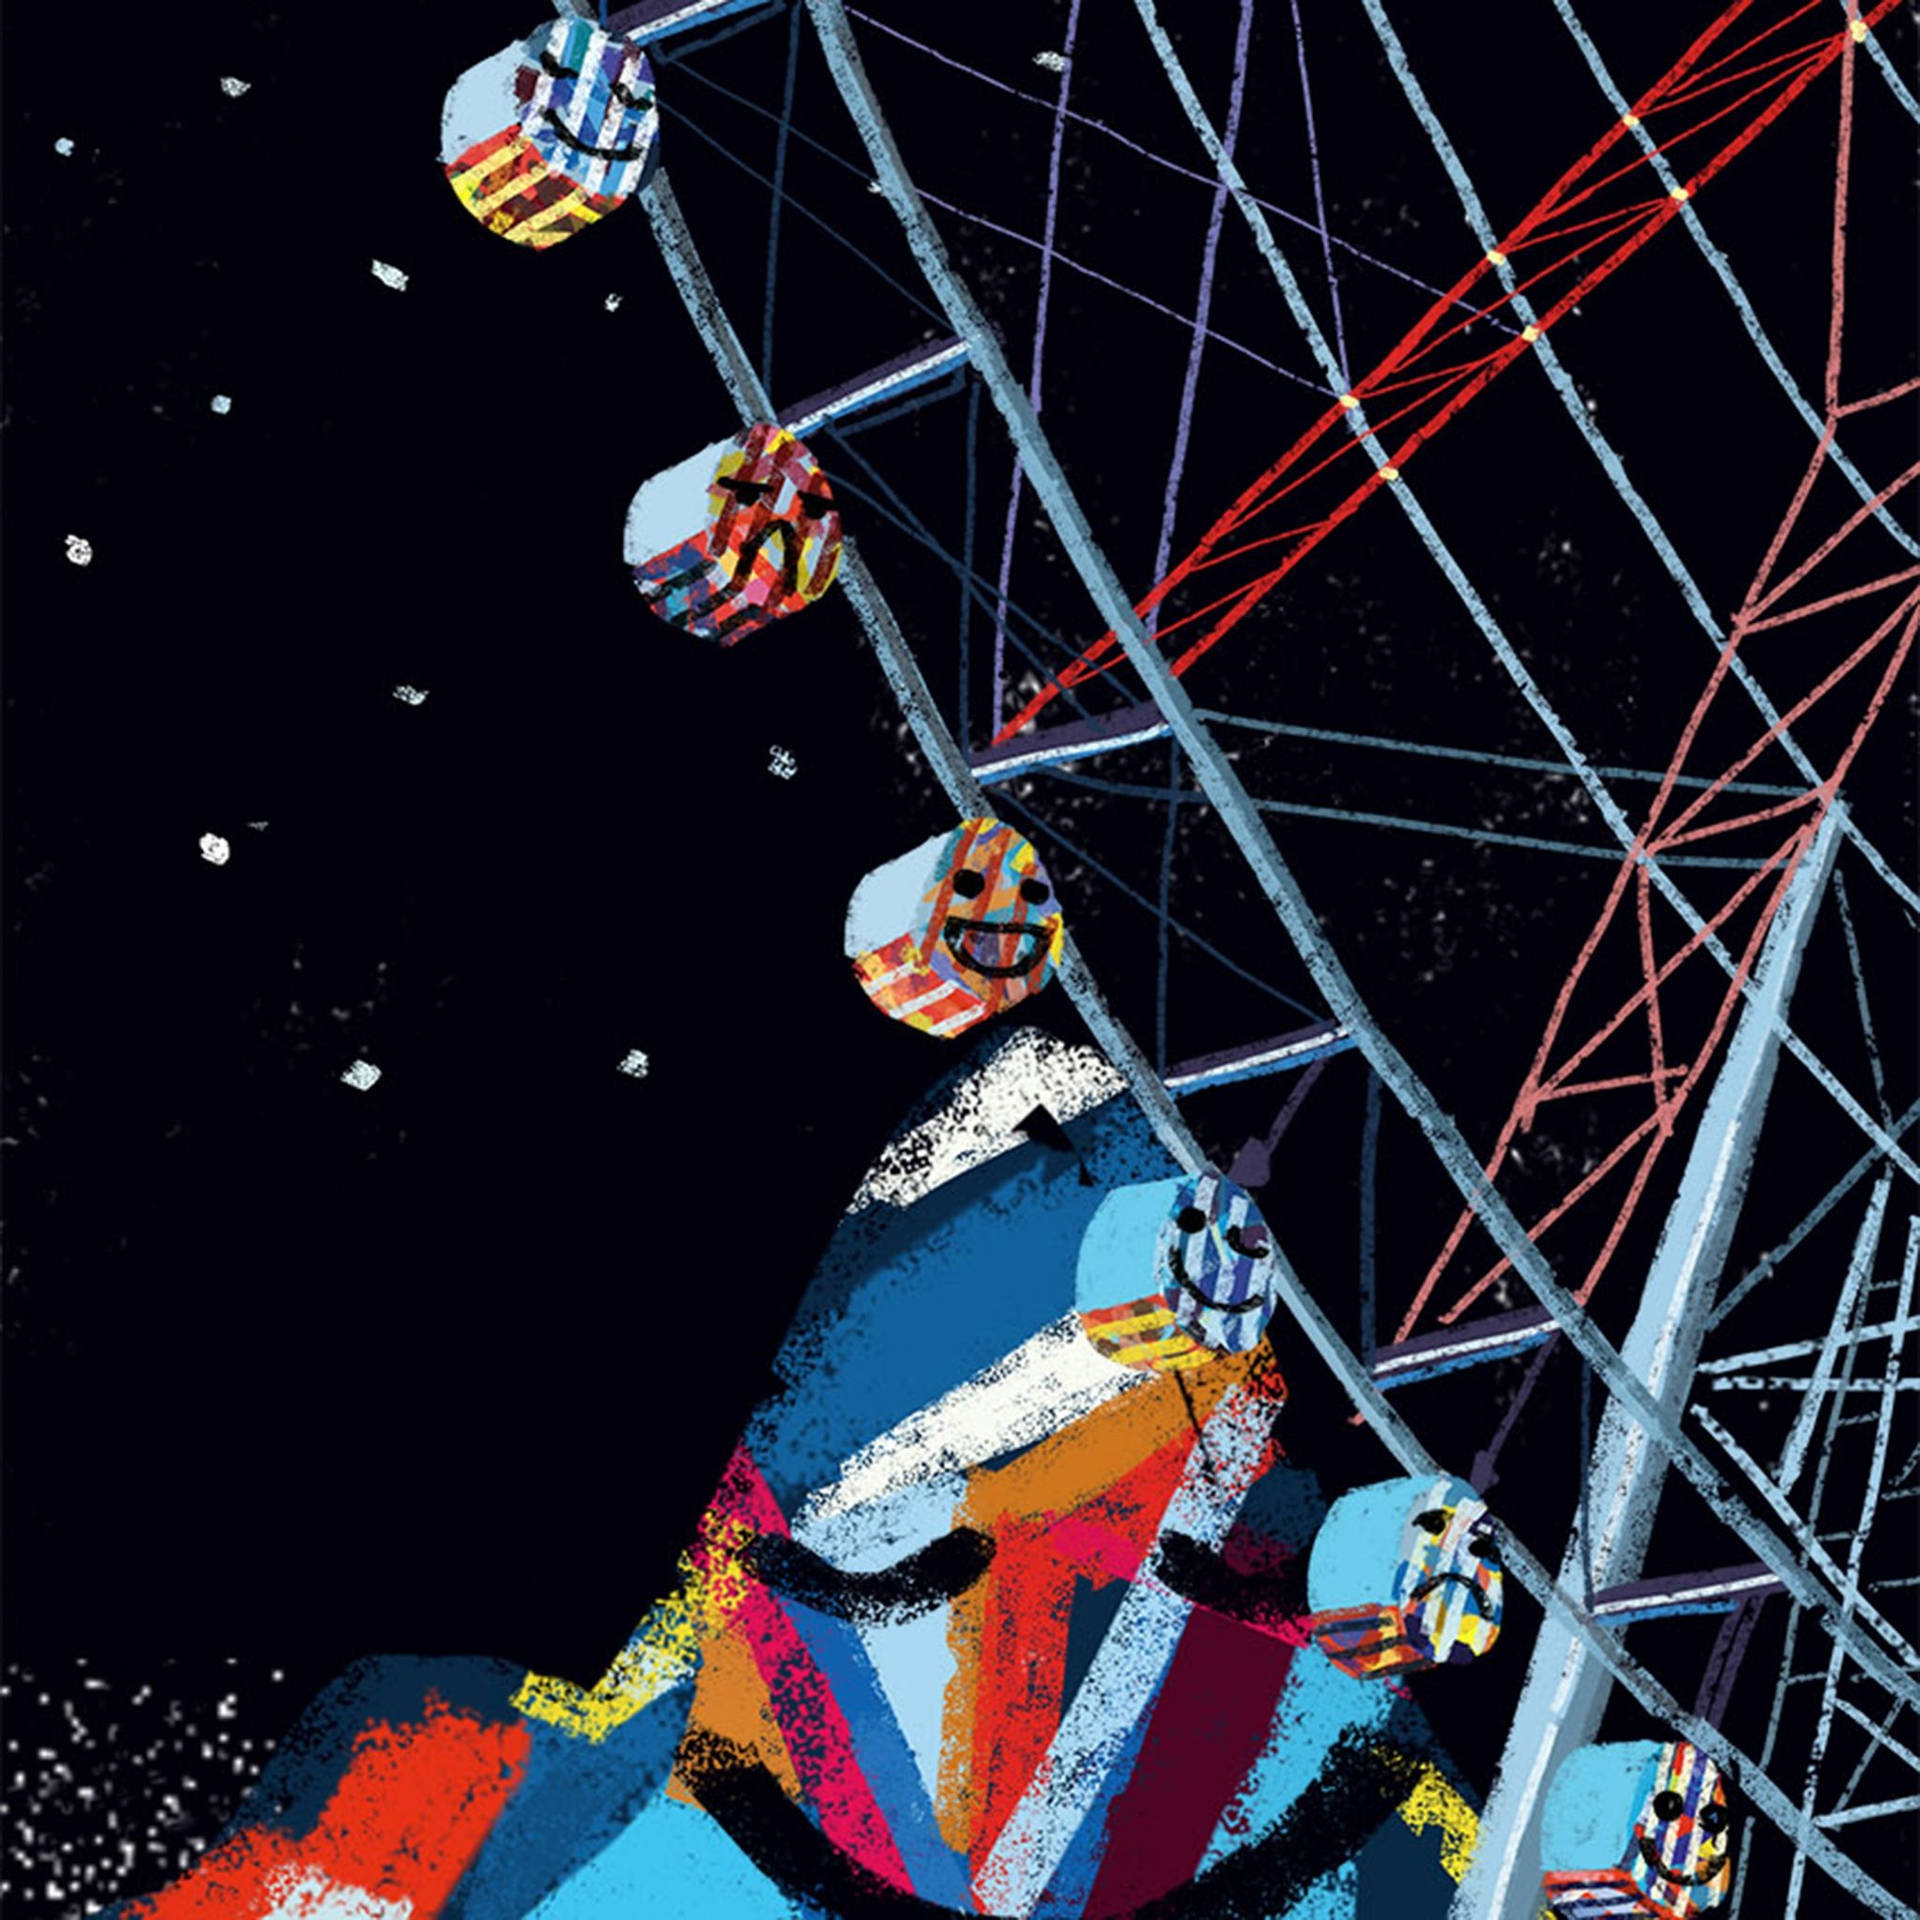 A modern take on classic experiences - this ferris wheel art is a reminder of the beauty of simpler times Wallpaper